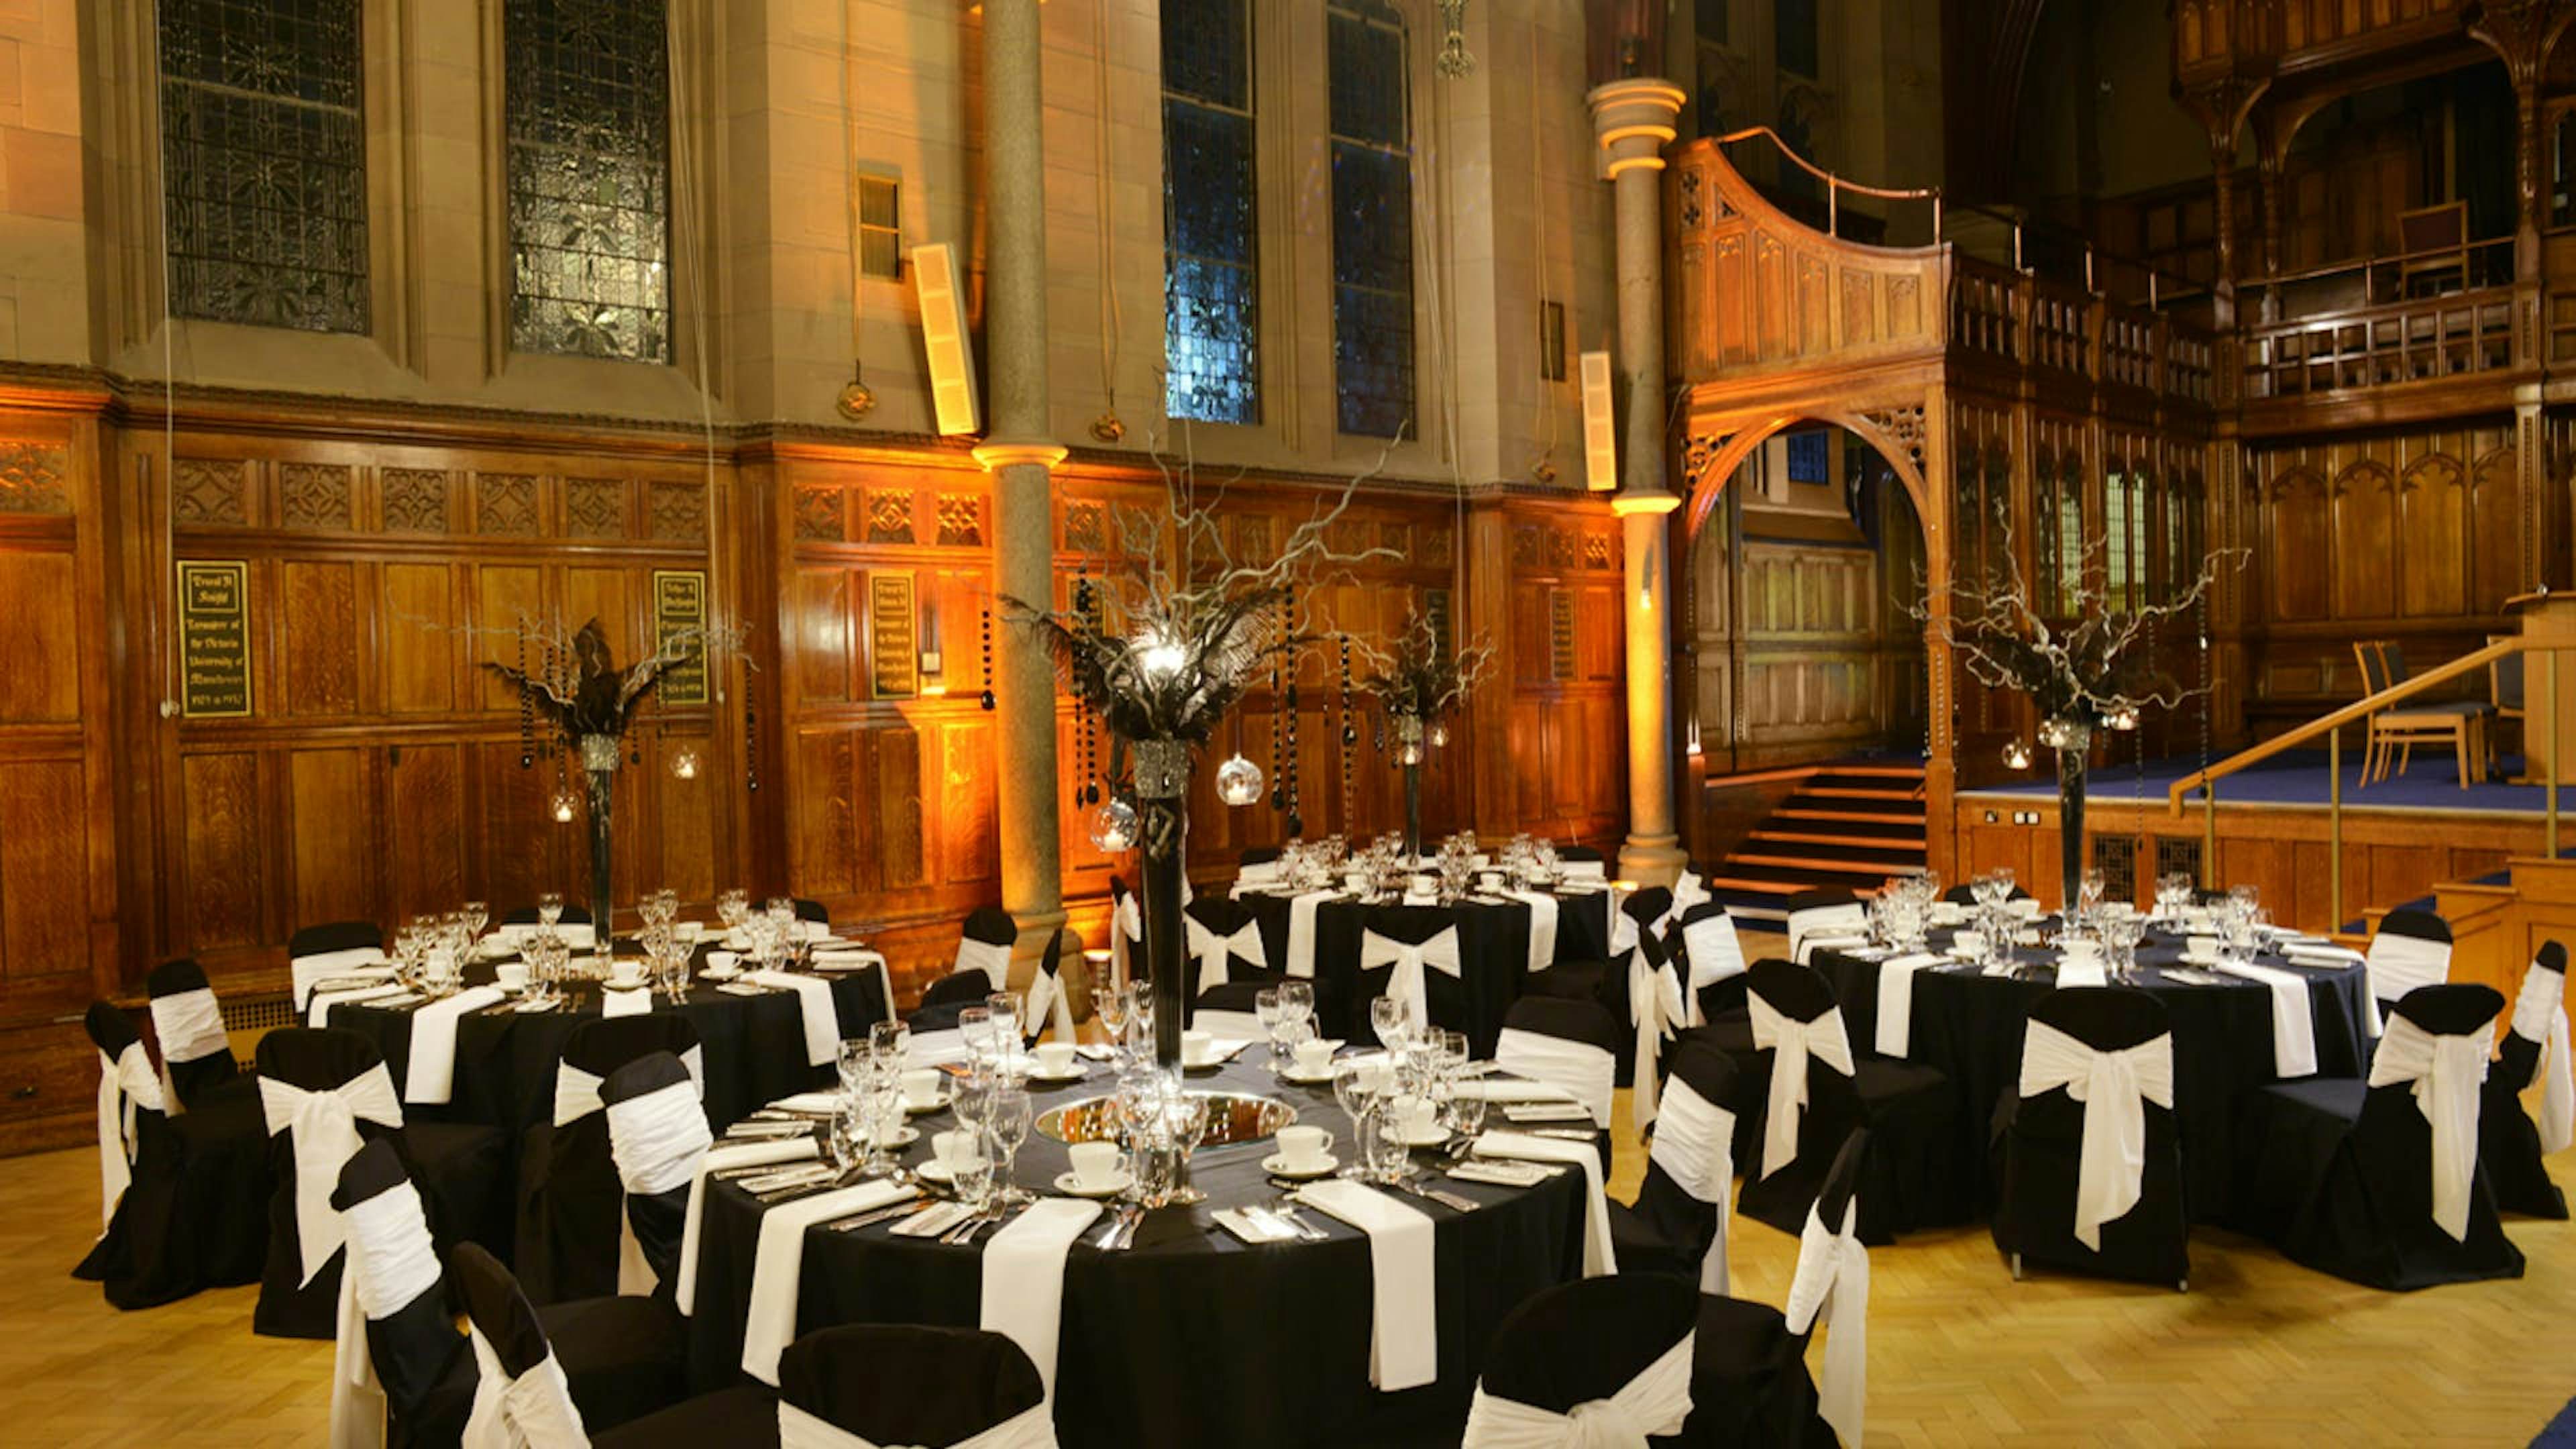 Whitworth Building Manchester | Events ...